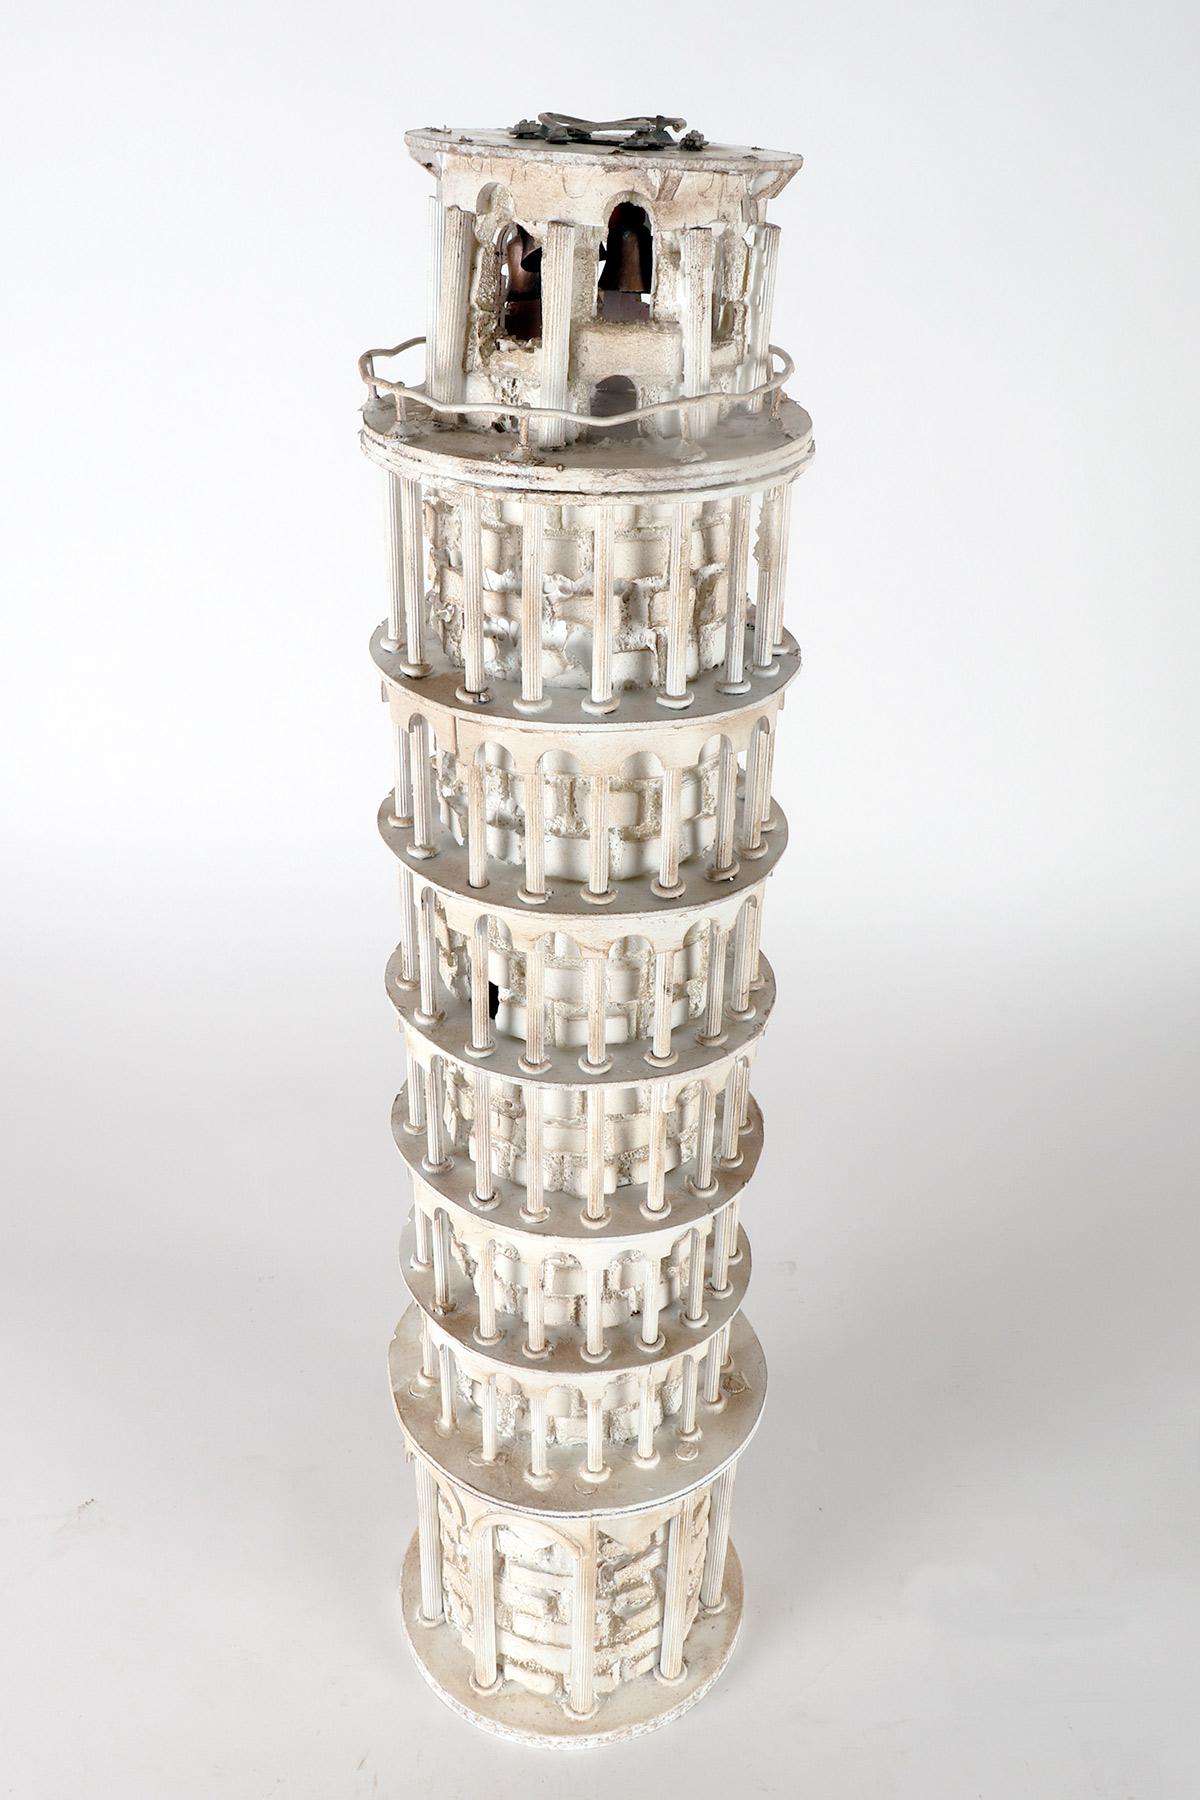 A Grand Tour wooden maquette, depicting the Tower of Pisa, Italy 1950. For Sale 4